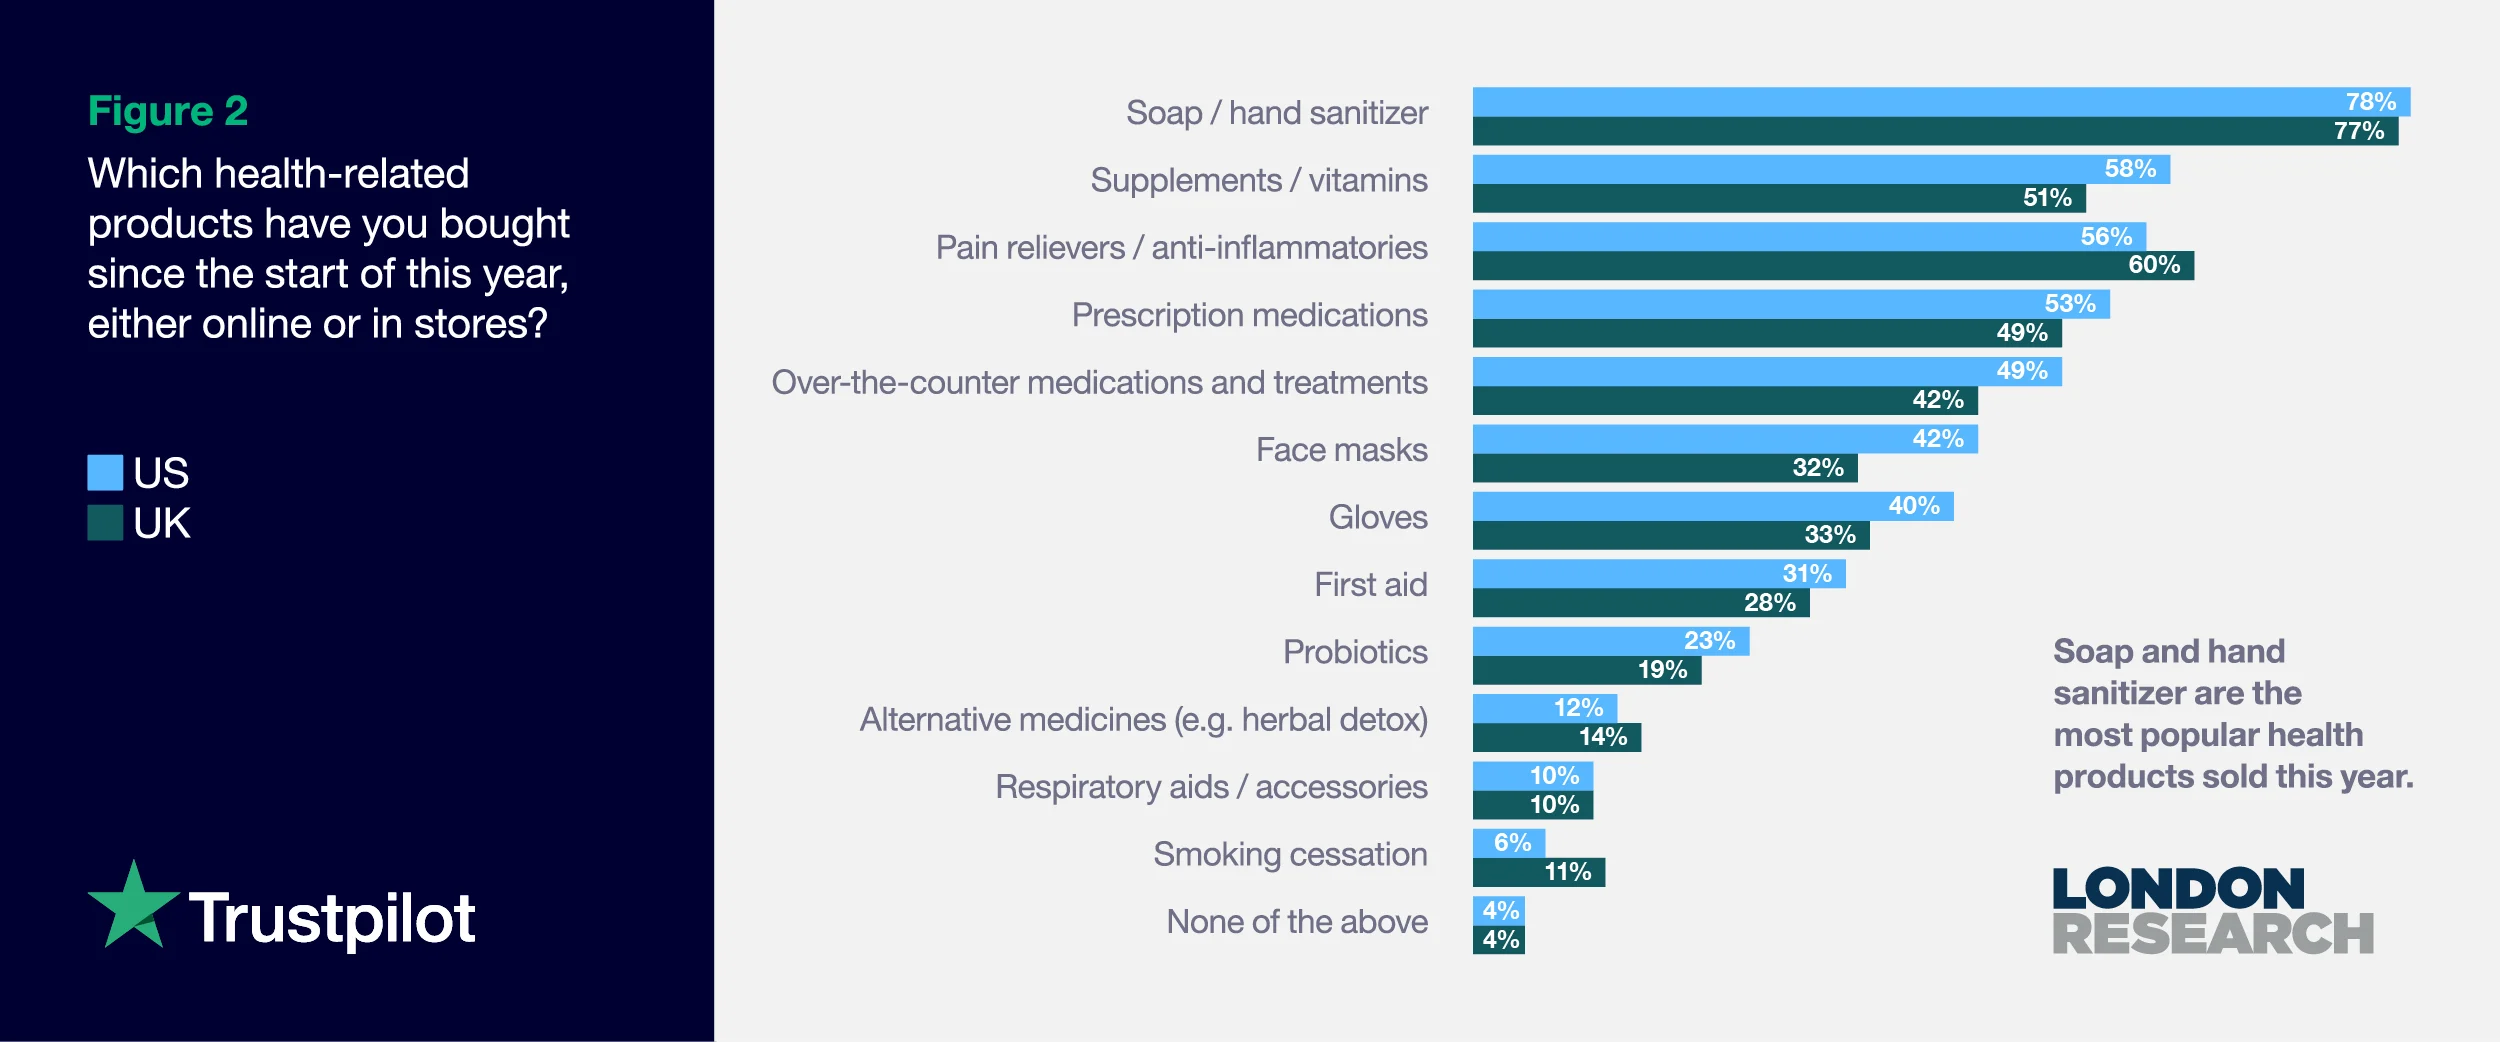 Figure 2: Which health-related products have you bought since the start of this year?